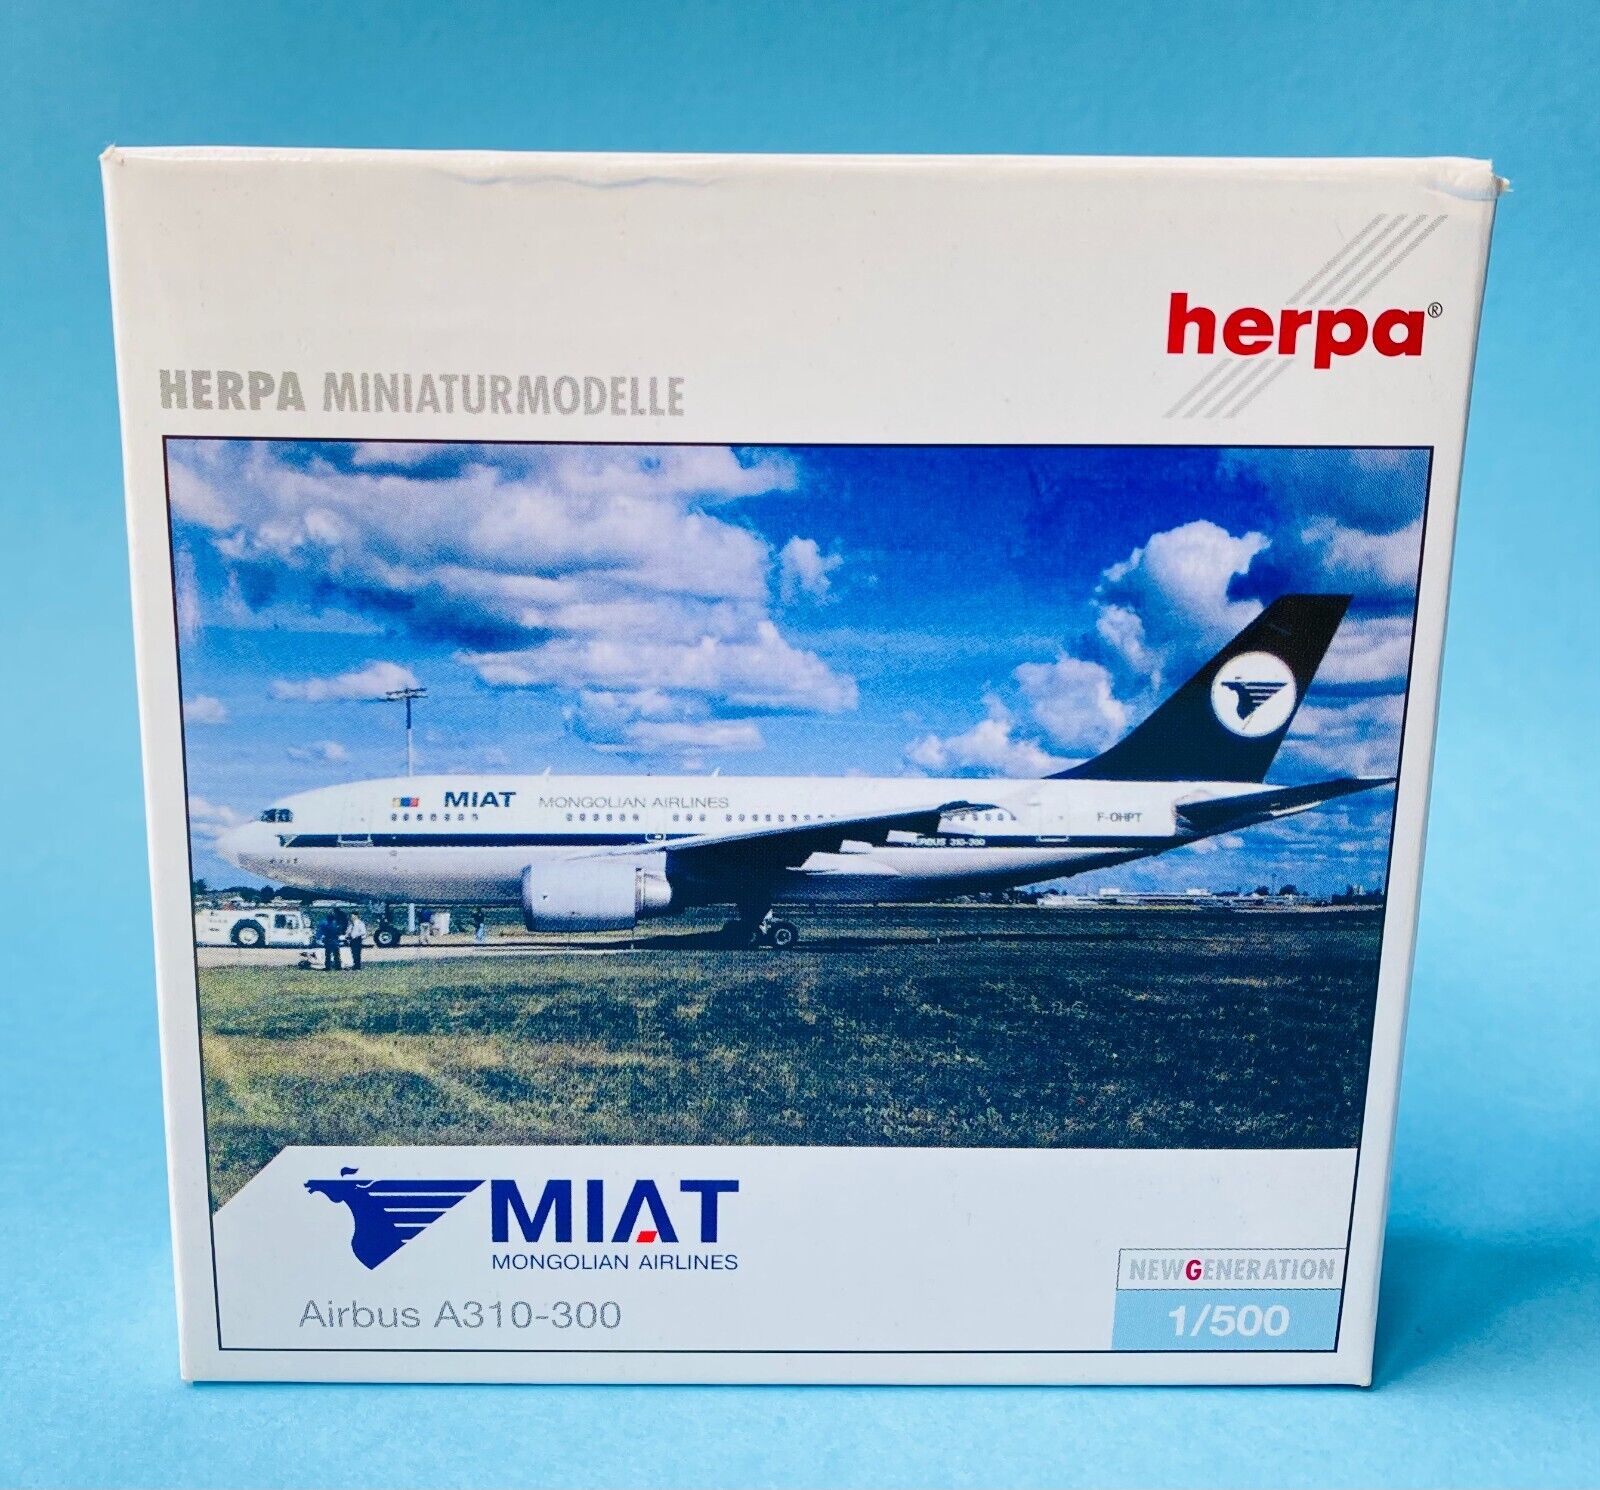 HERPA '501156' 1:500 MIAT MONGOLIAN AIRLINES AIRBUS A310-300 MODEL PLANE BOXED